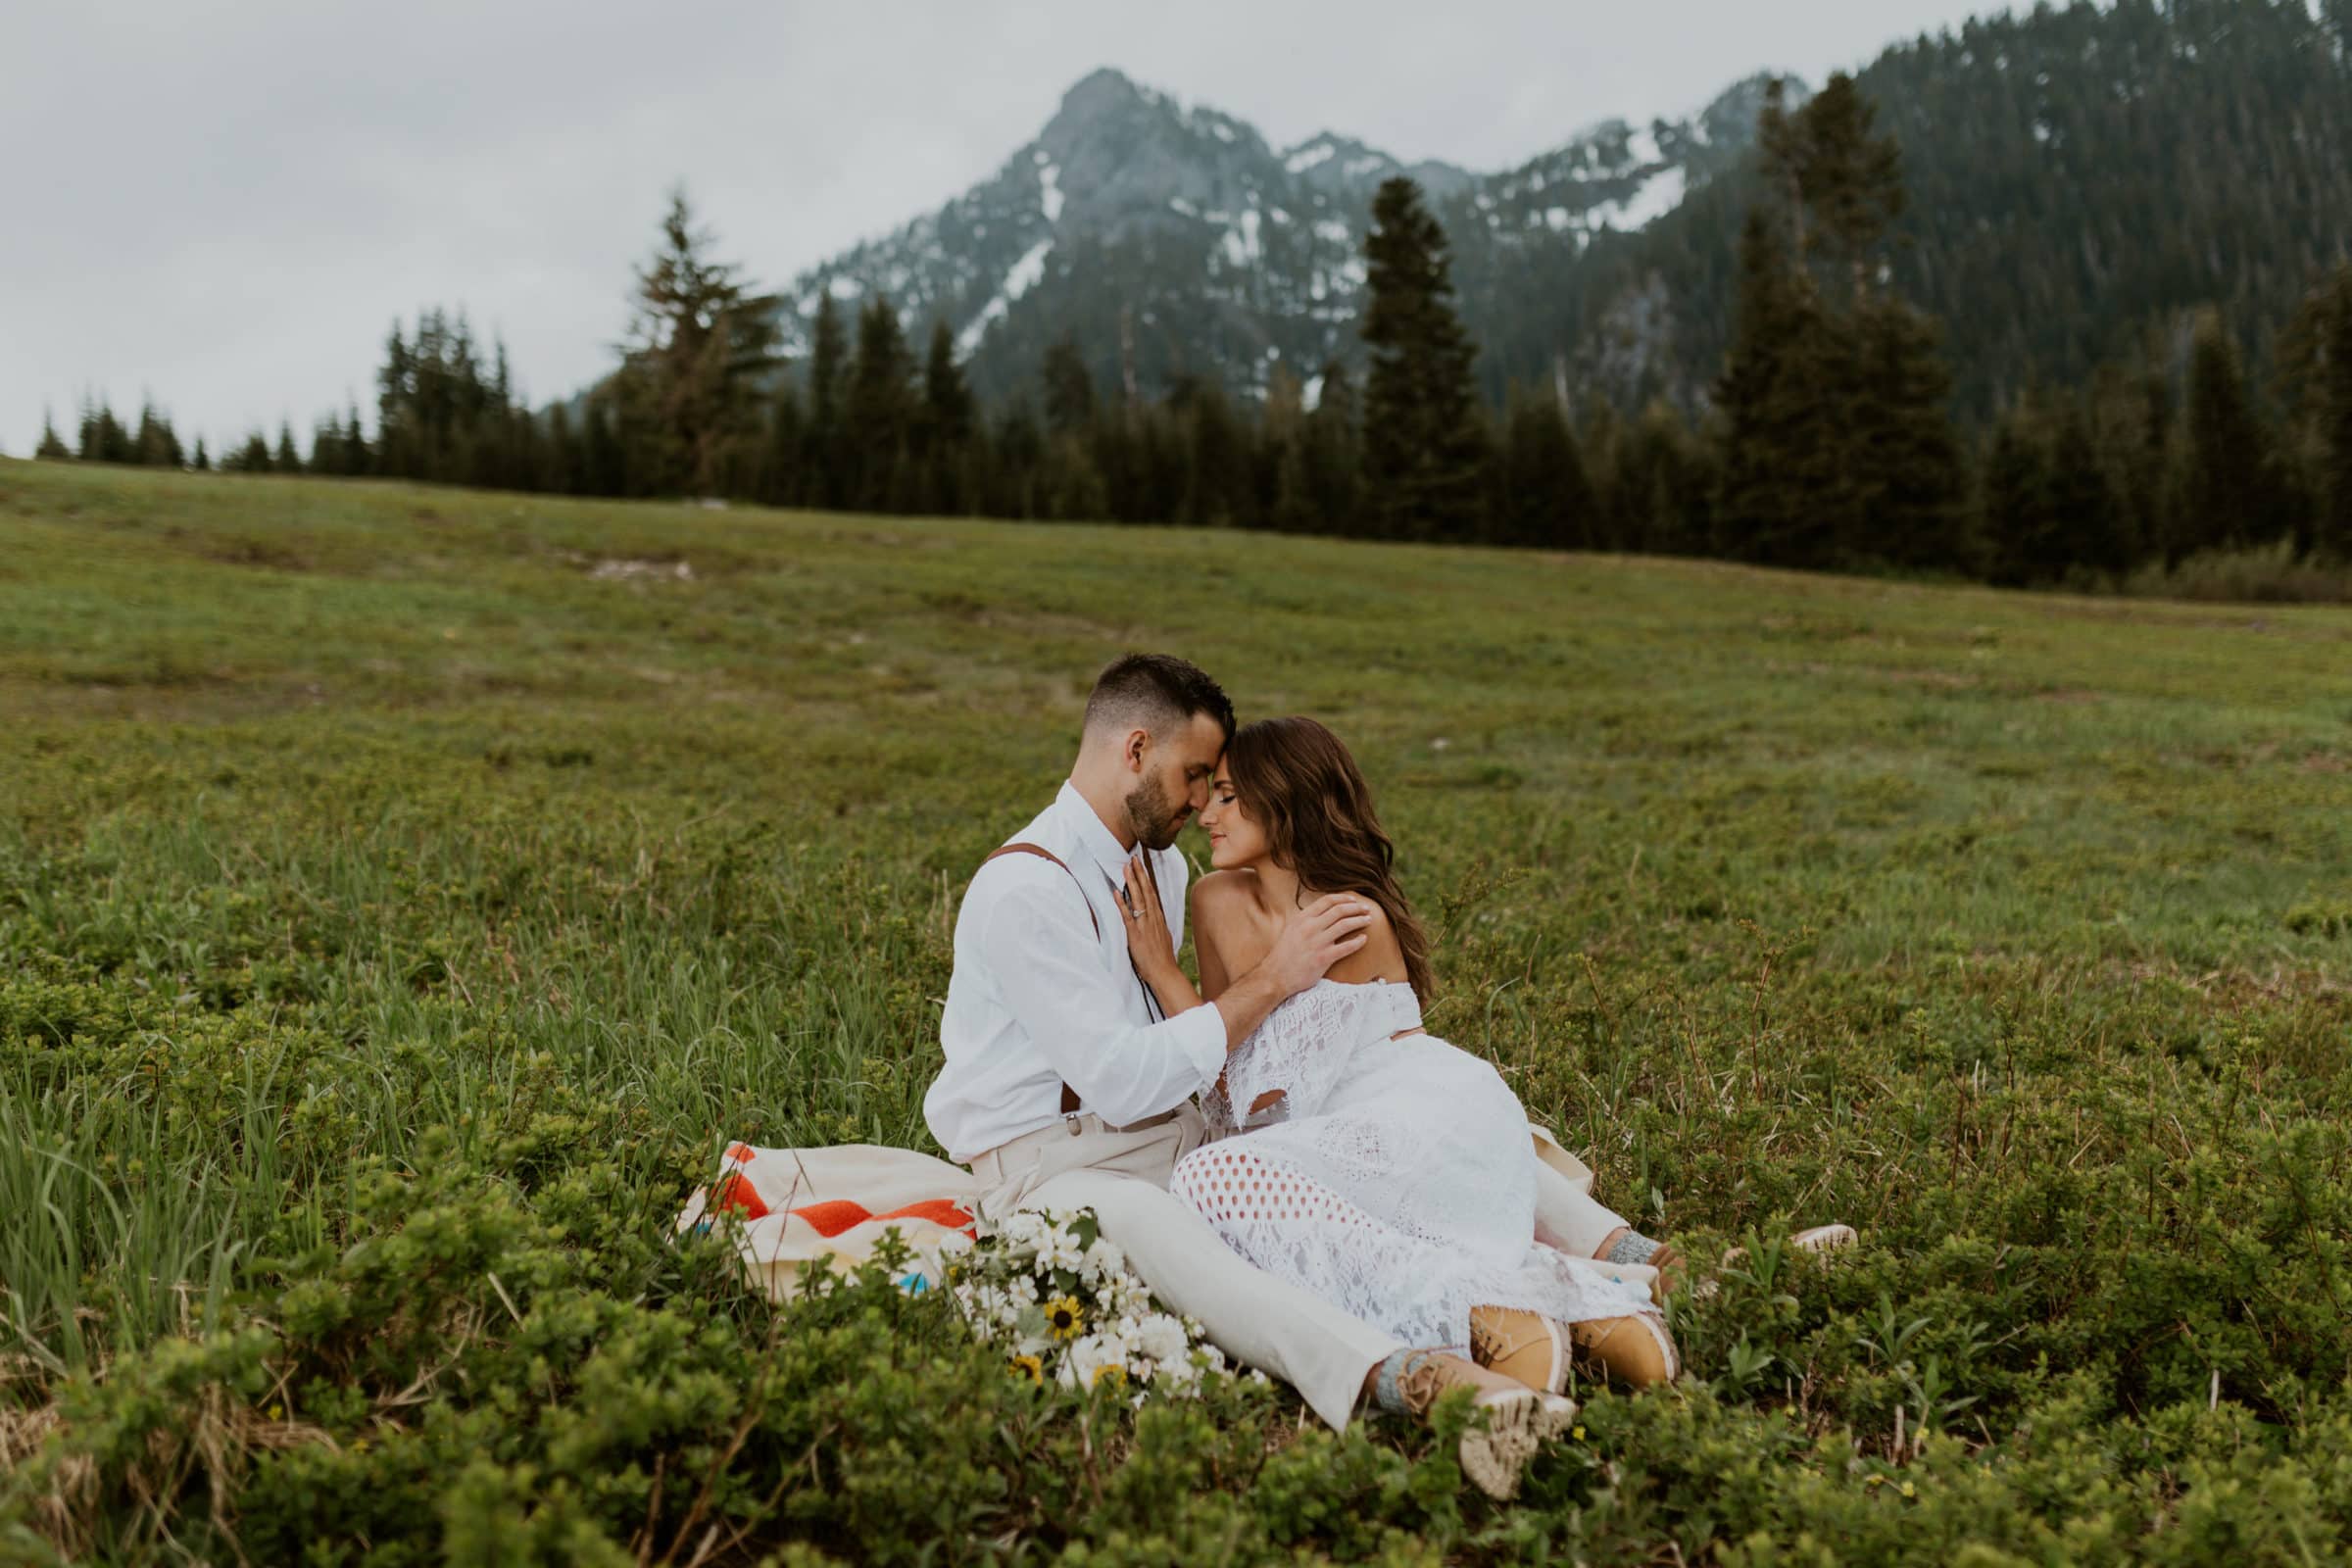 A bride and groom snuggling in front of a mountain on their wedding day.